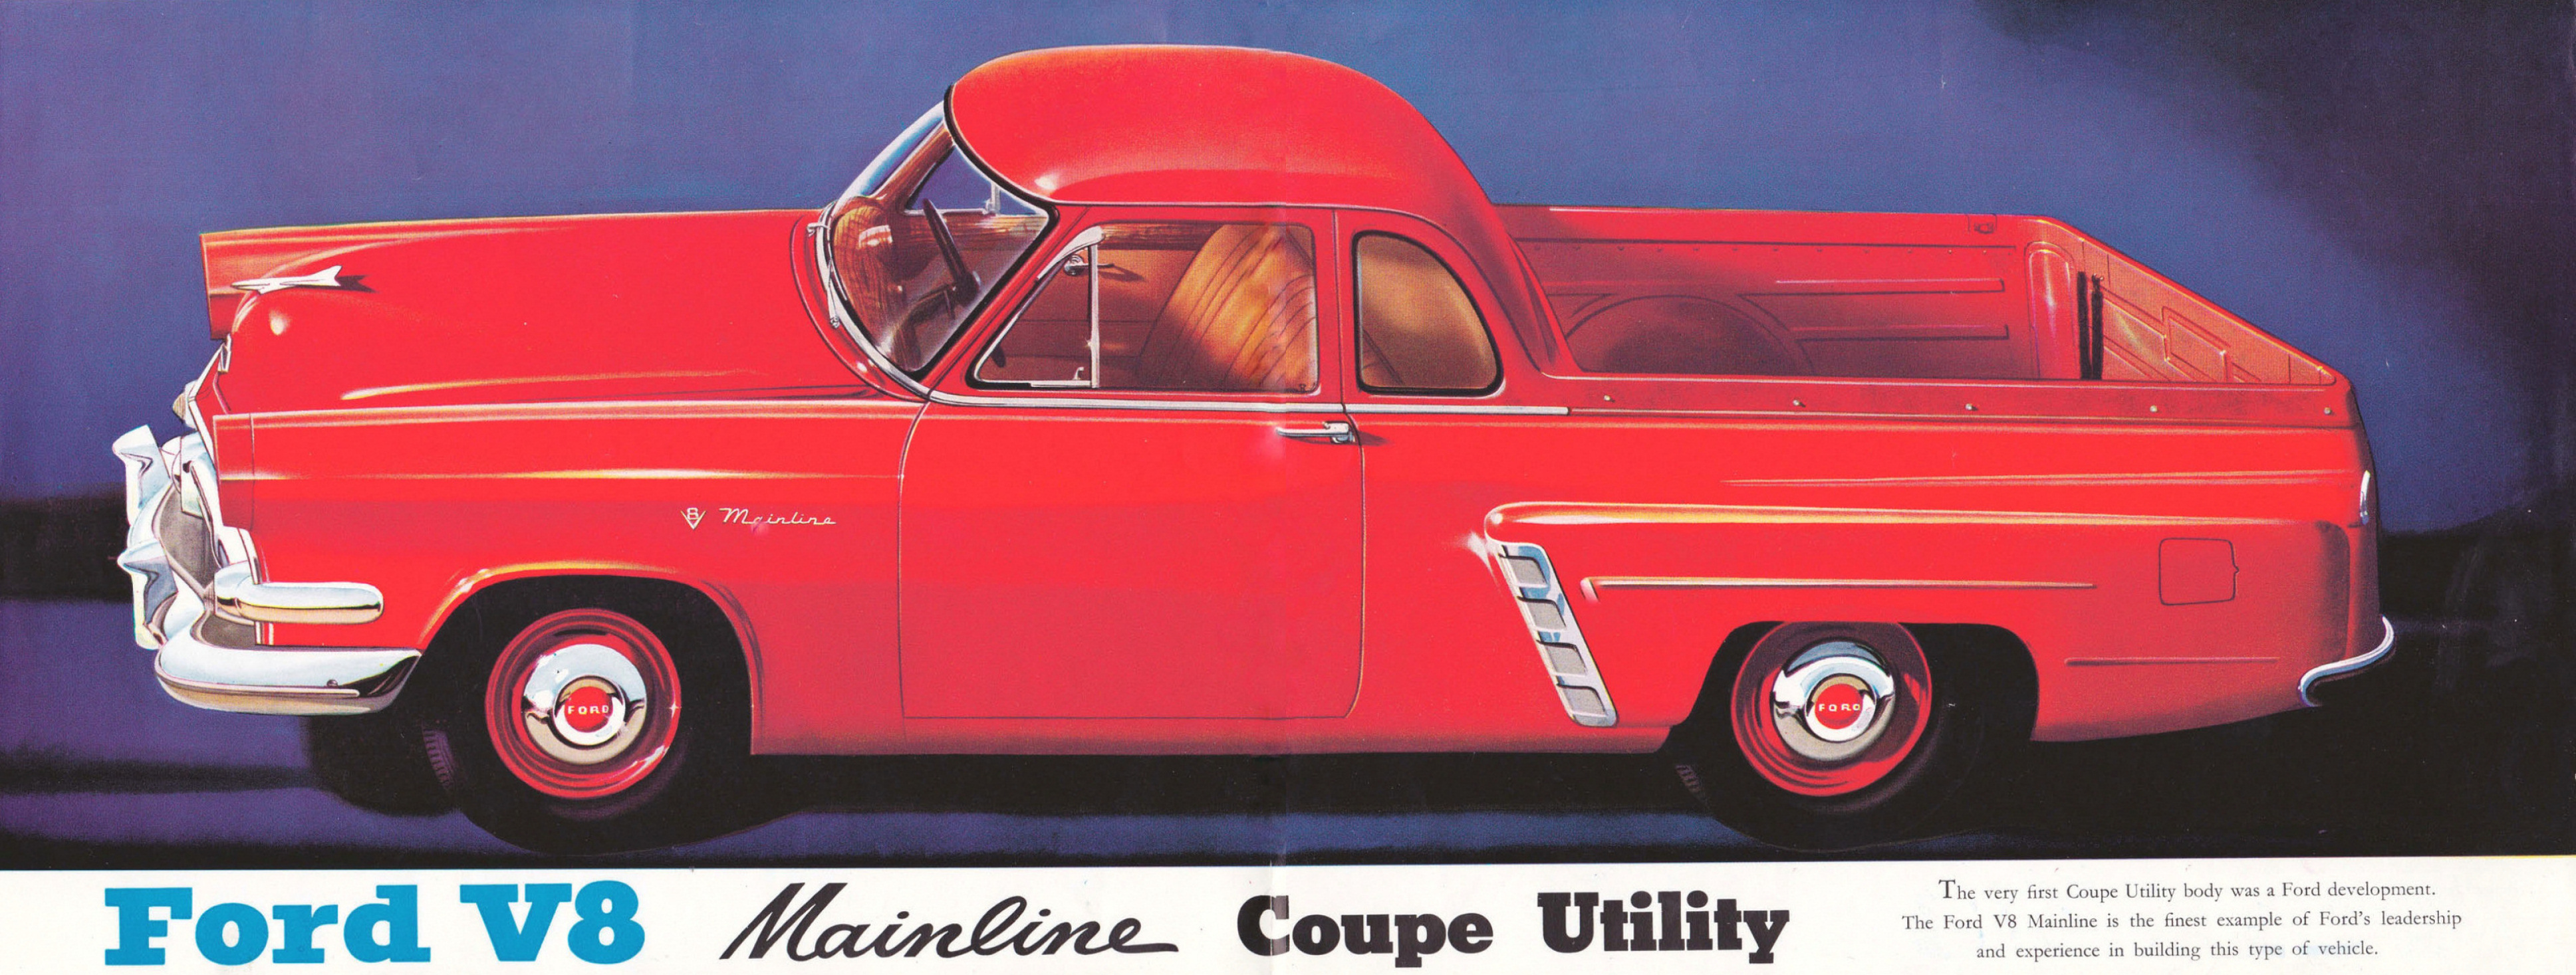 1954_Ford_Mainline_Utility-04-05